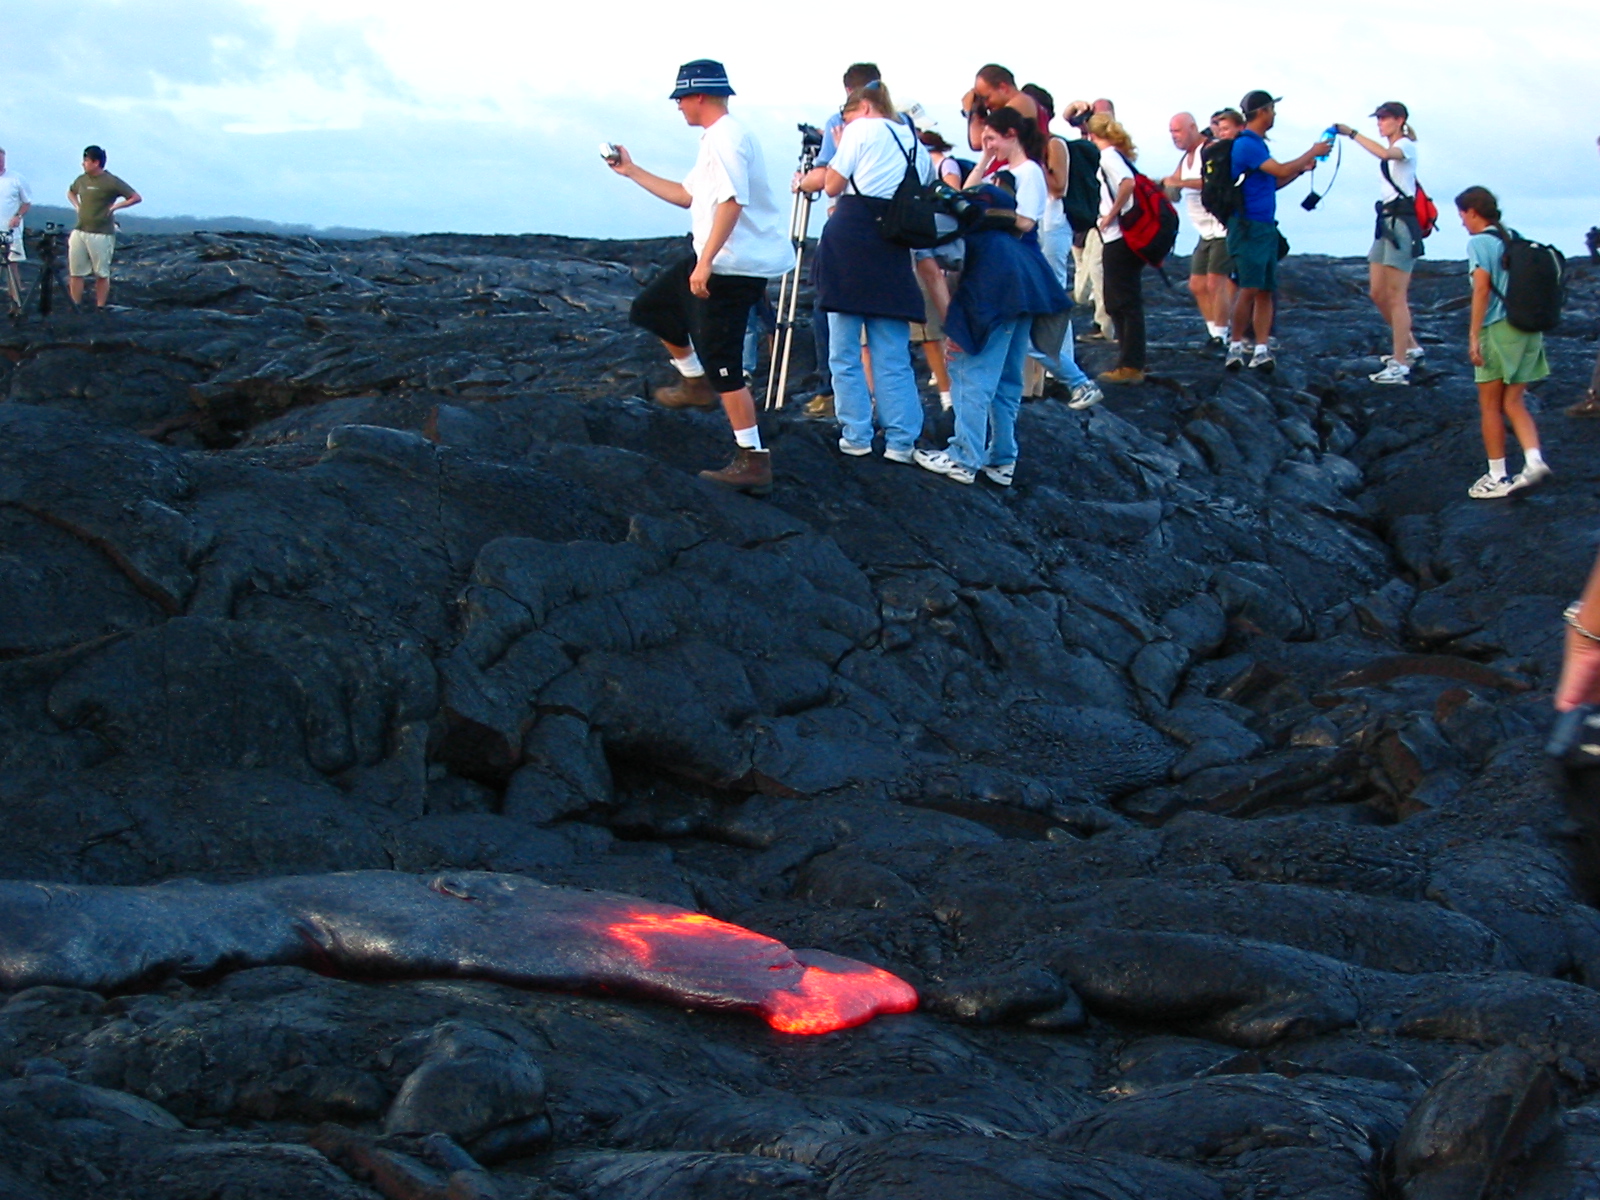 Watching the lava flow